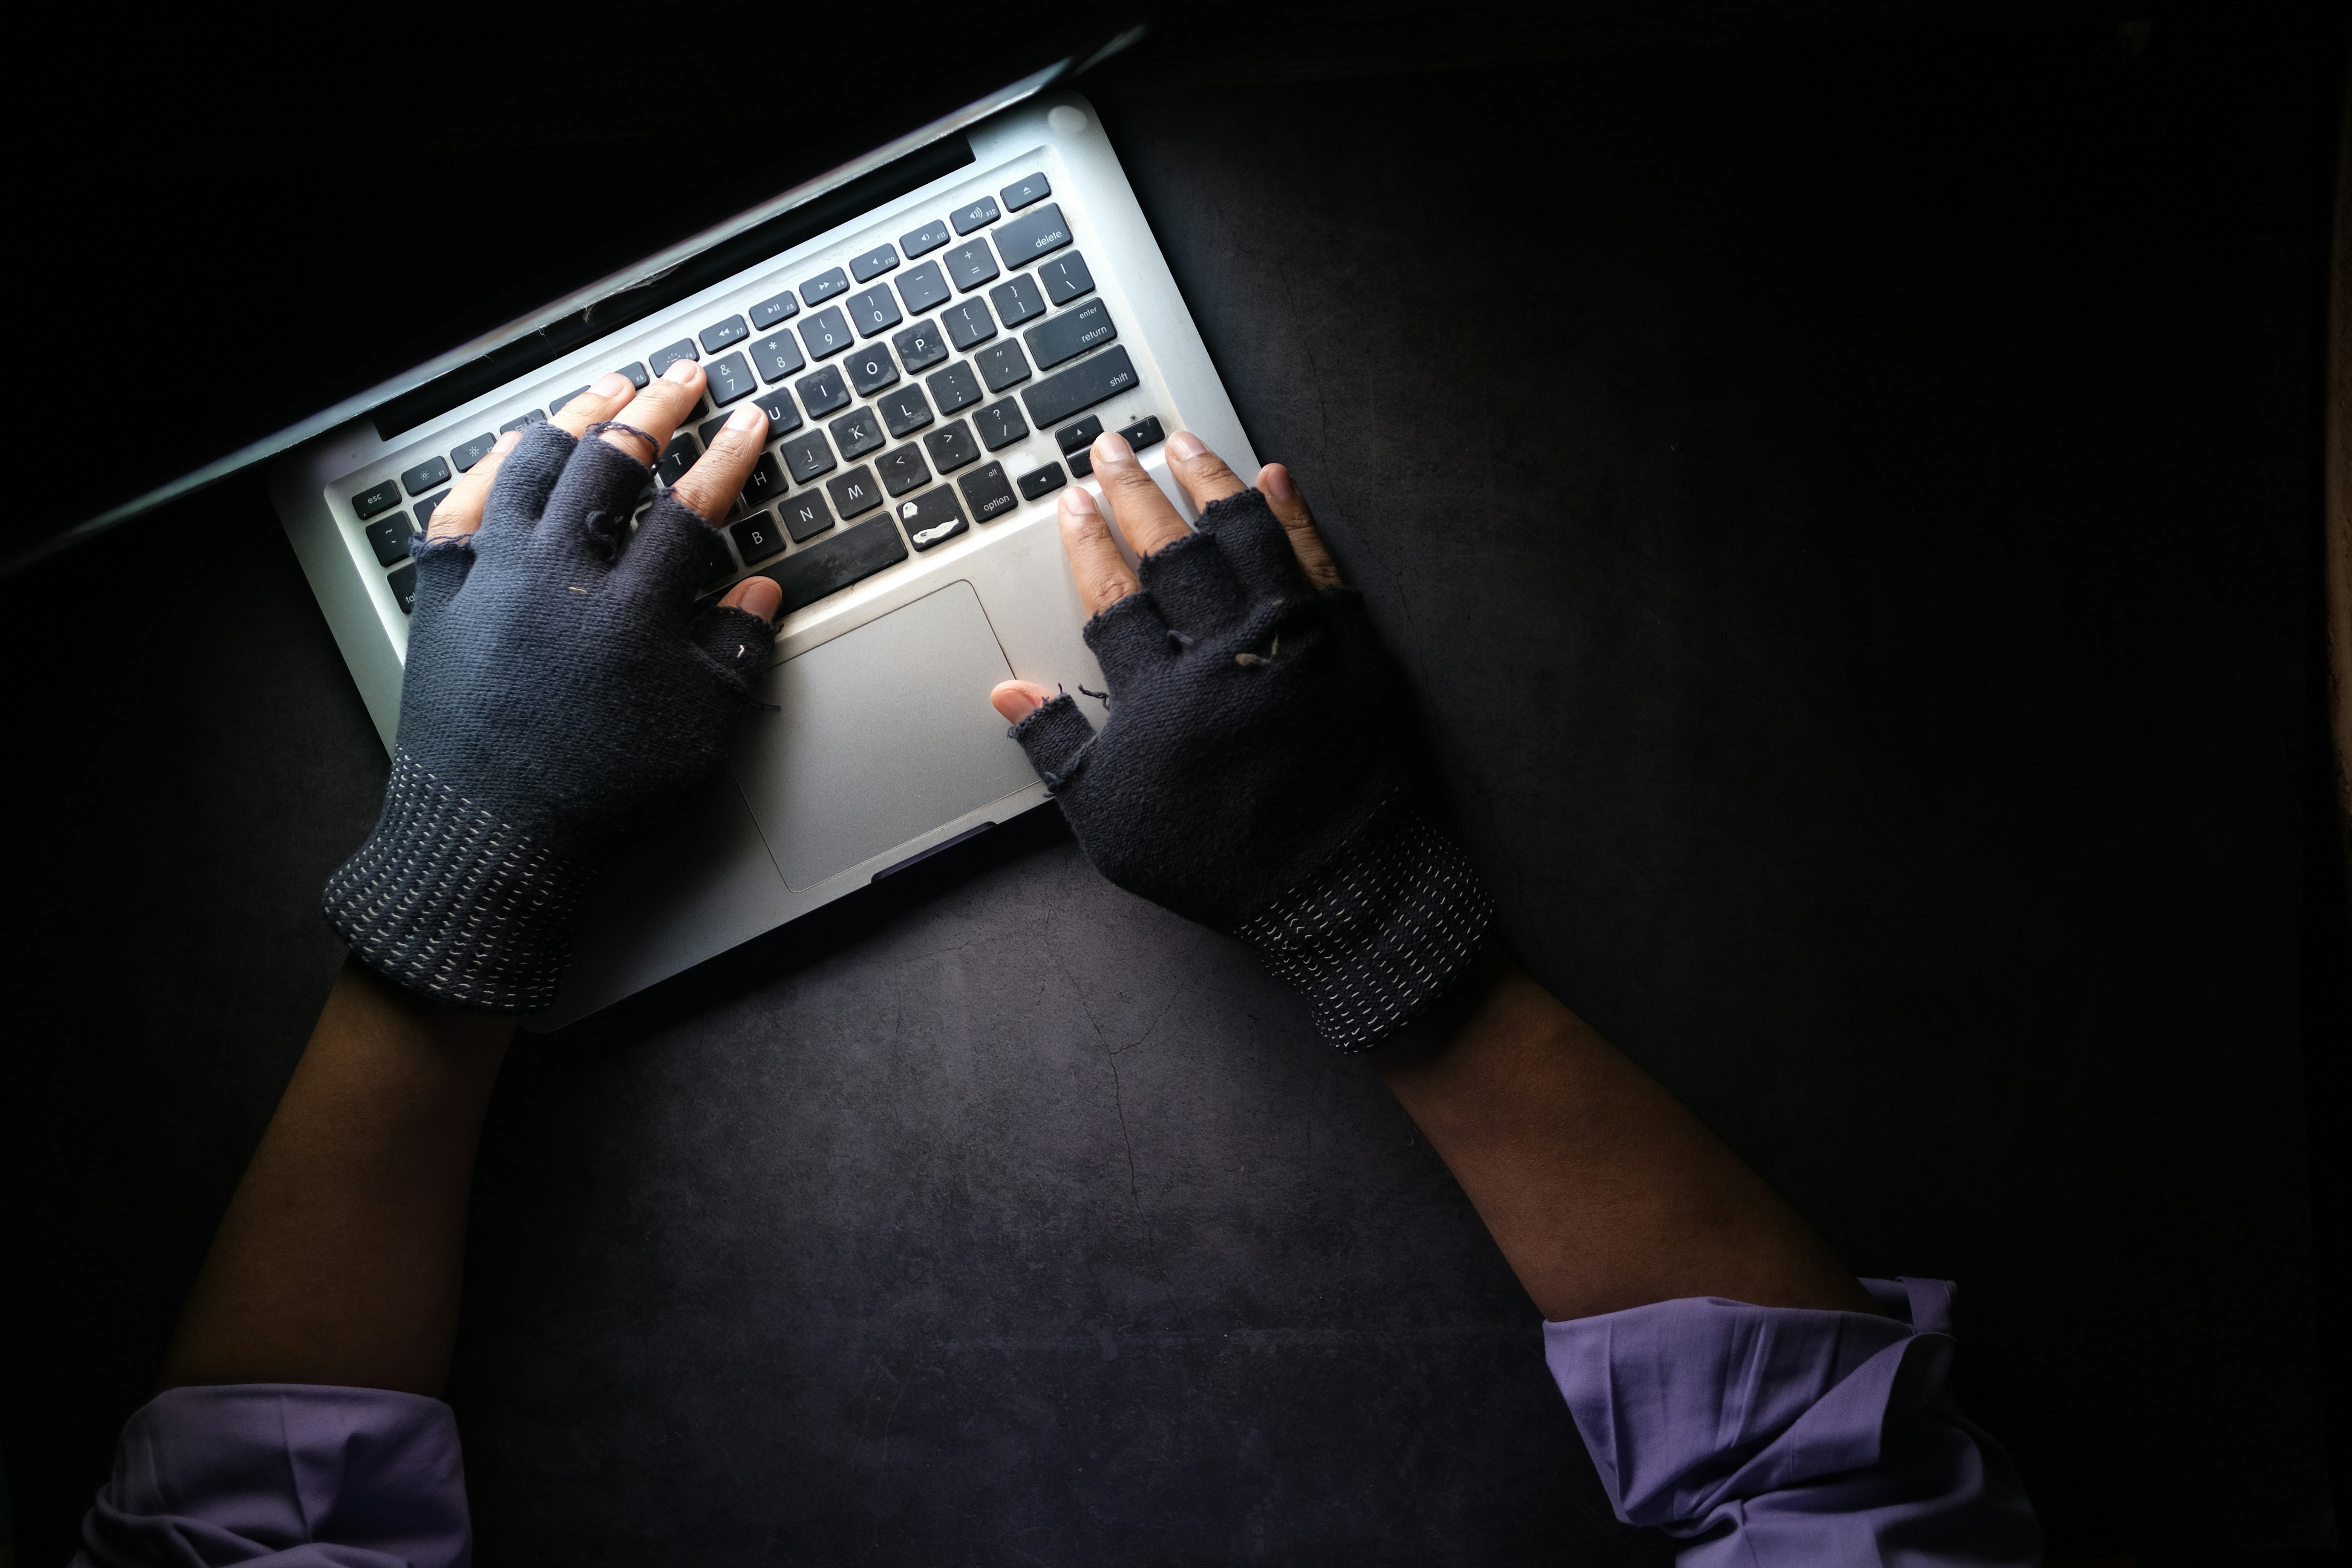 A criminal with fingerless gloves types on a laptop in the dark.